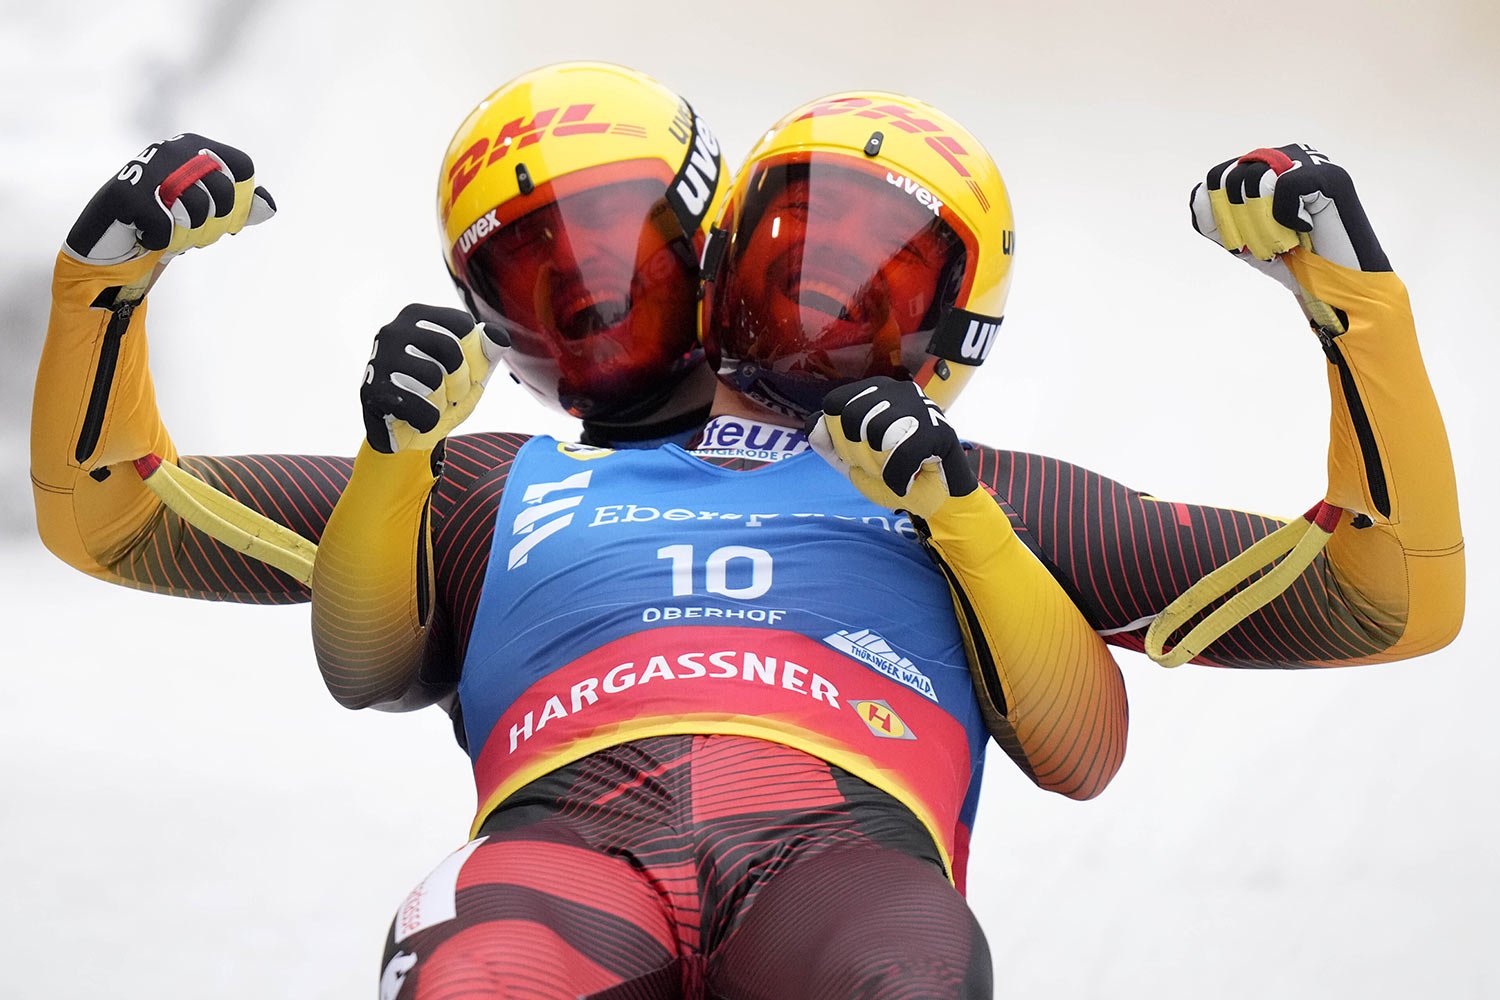  Toni Eggert and Sascha Benecken of Germany, celebrate winning the men's doubles race at the Luge World Championships in Oberhof, Germany, Jan. 28, 2023. (AP Photo/Matthias Schrader) 